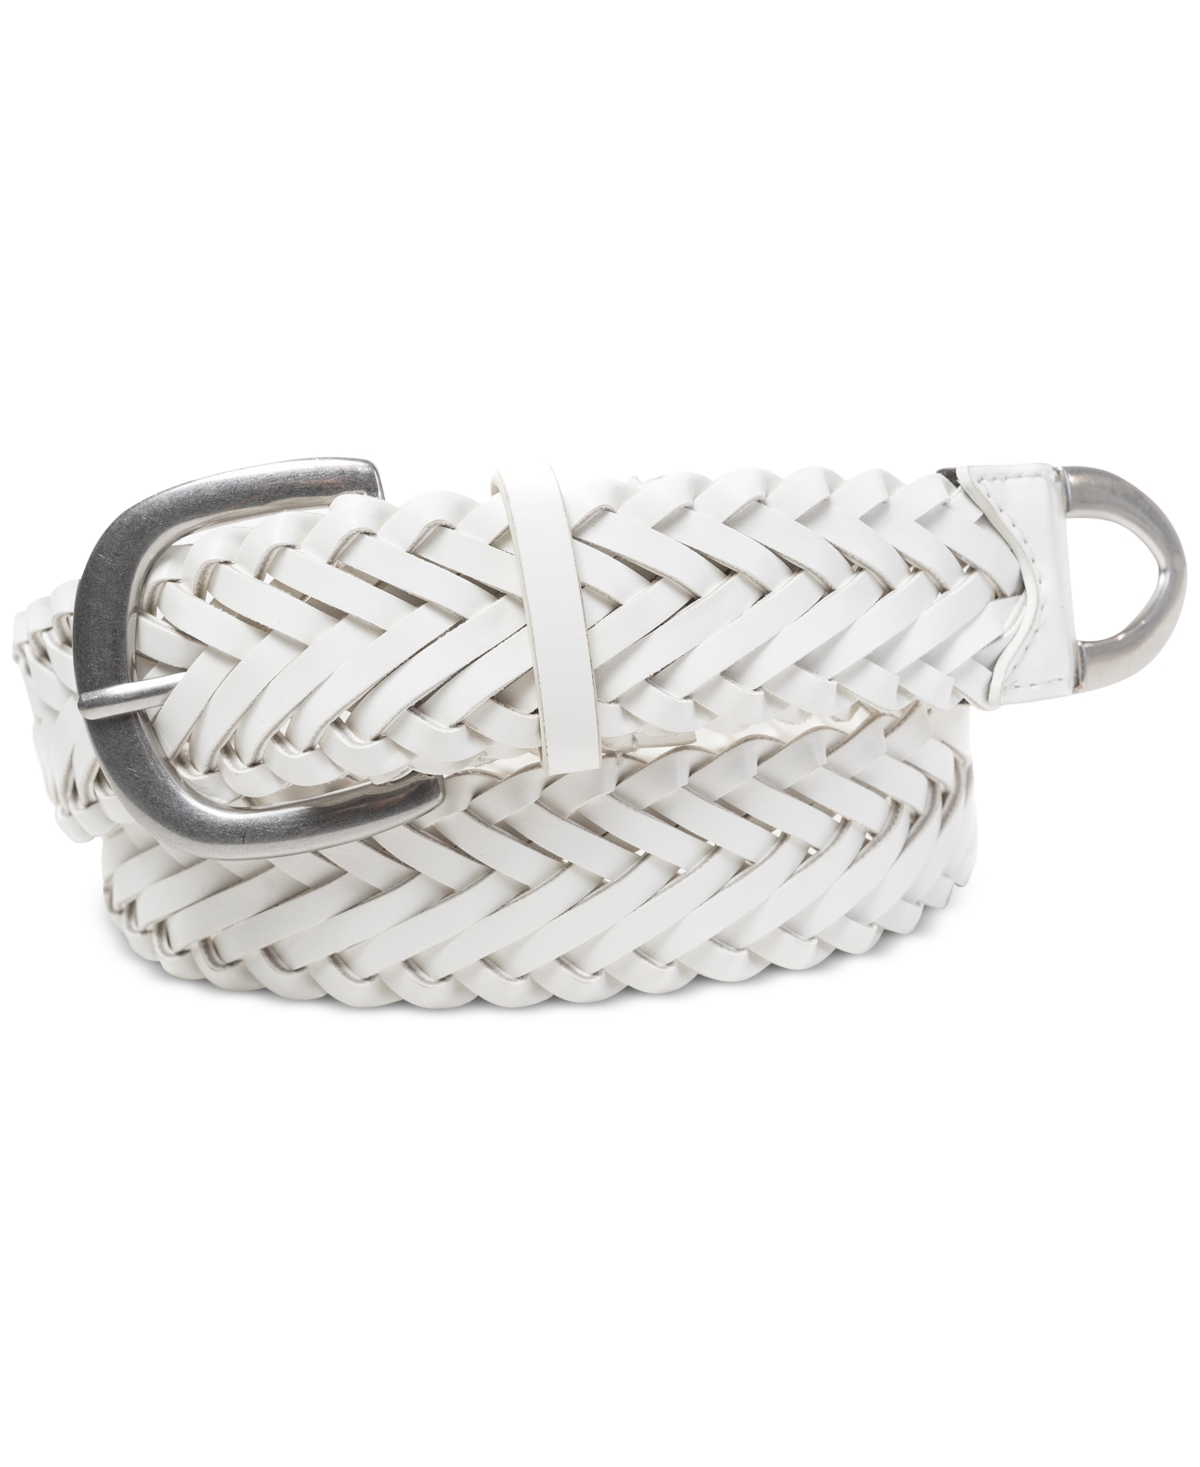 Style & Co Braided Belt With Metal Buckle In White